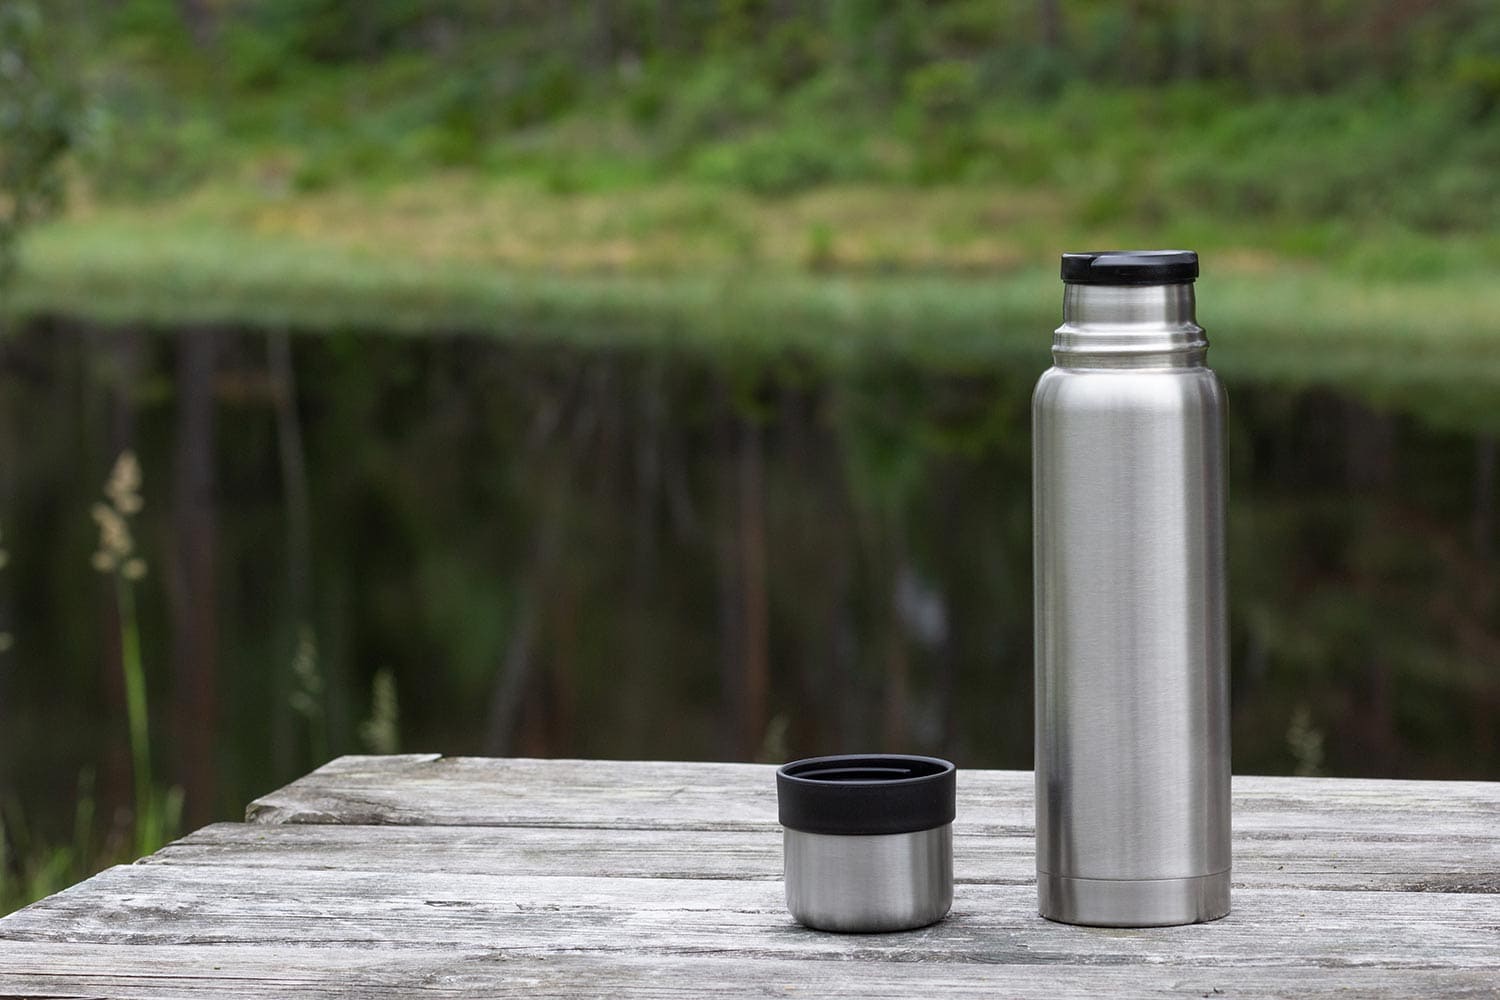 Thermos and cup on wooden table in forest near lake